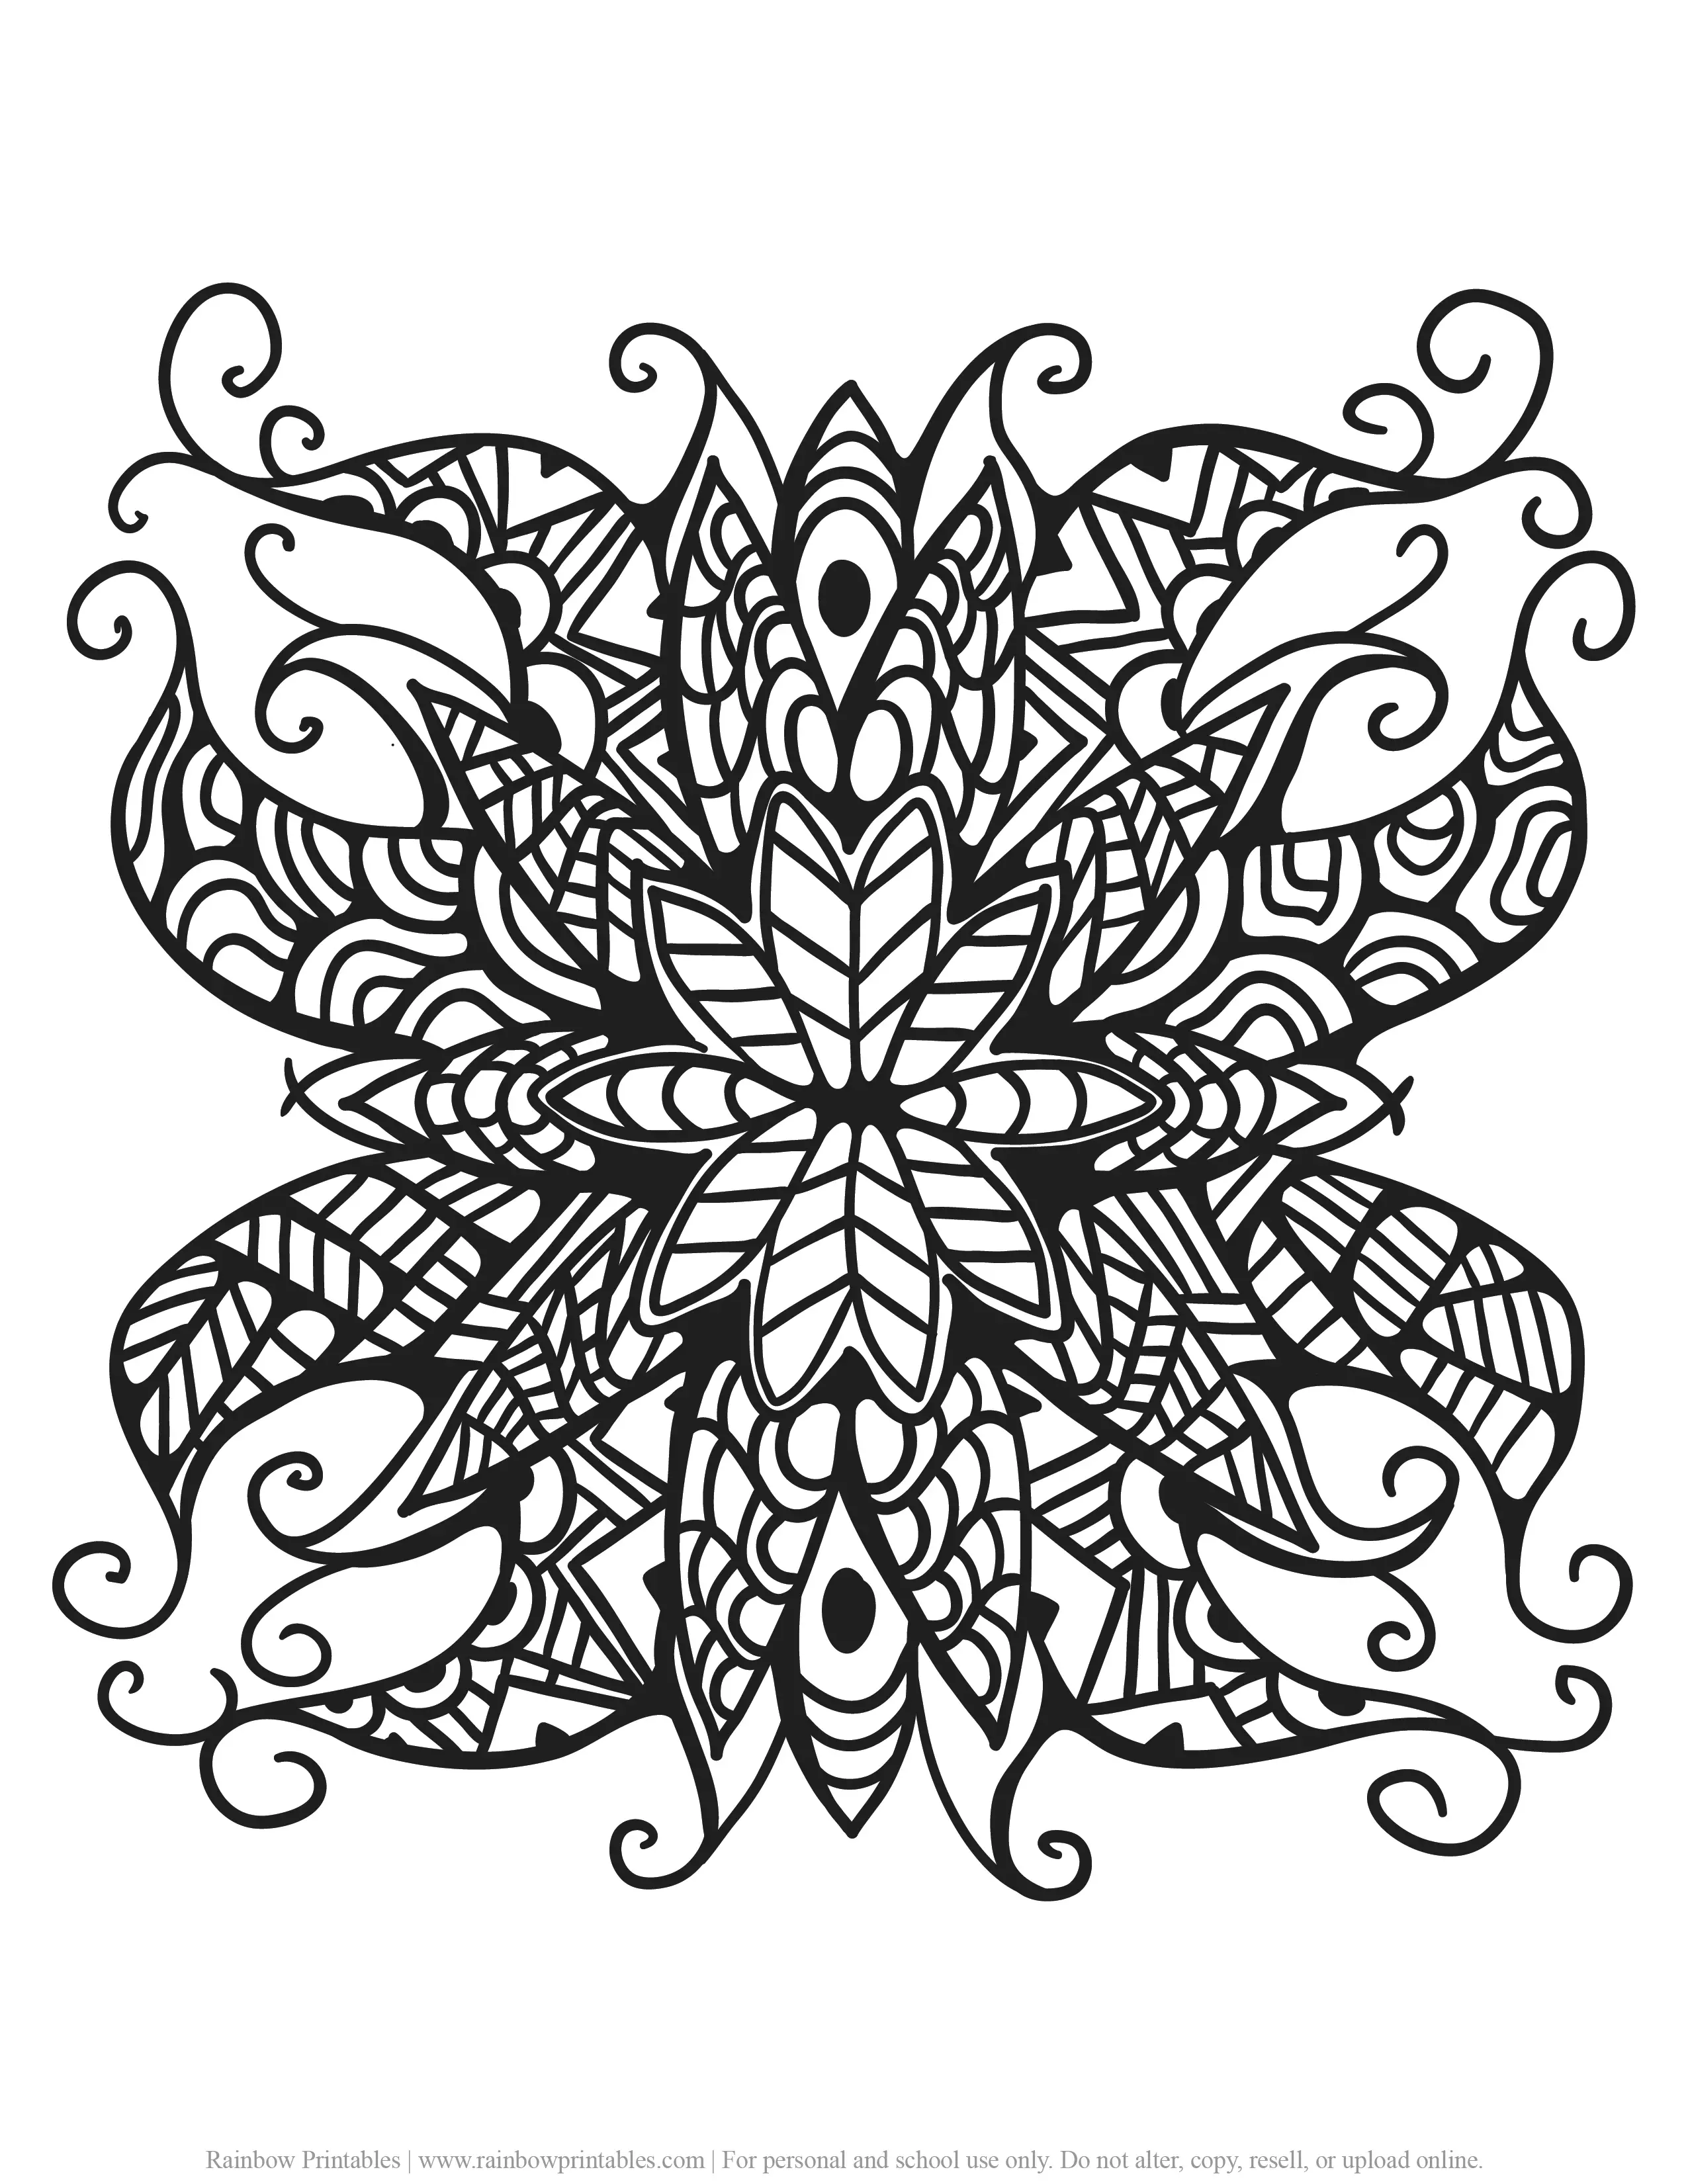 ADULT COLORING PAGES ANTI-STRESS RELIEF PRINTABLE MANDALA PATTERN GROWN UP RELAXING ACTIVITY PRINTABLE Flowers